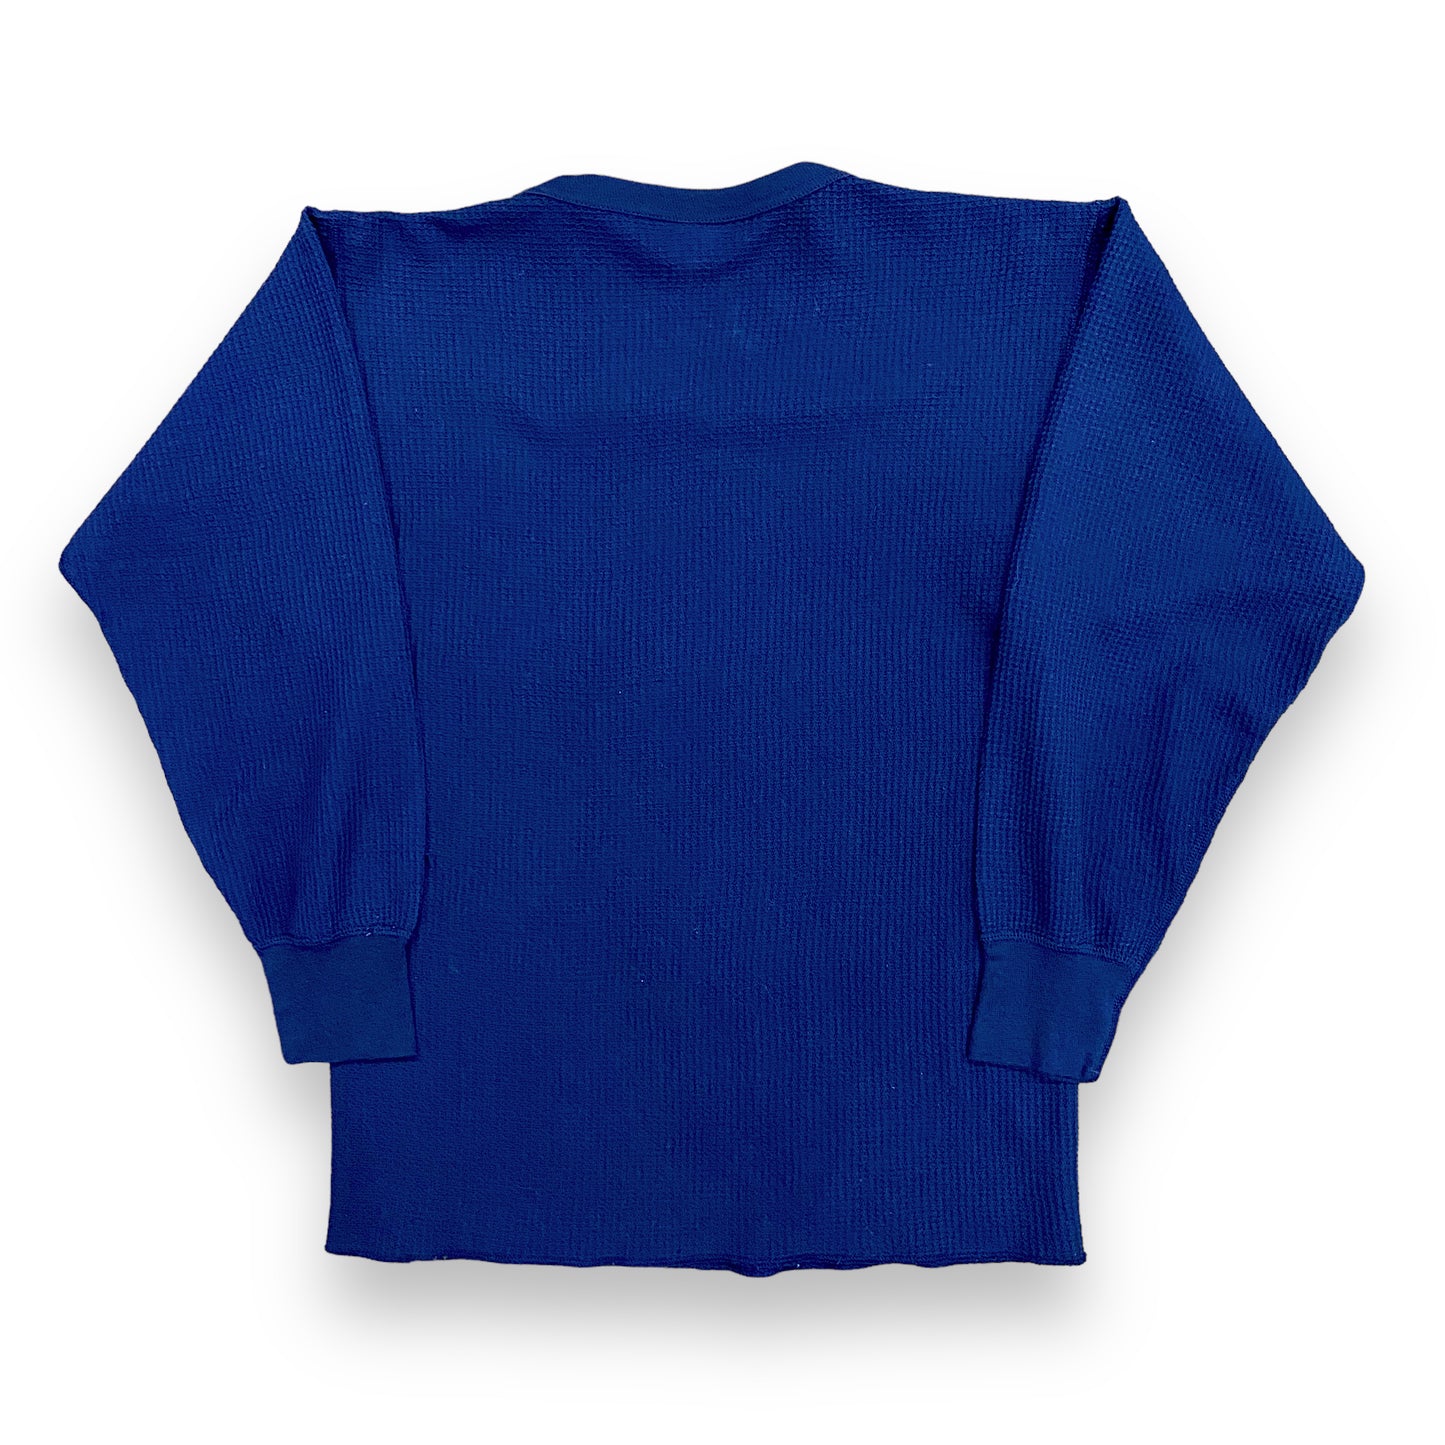 1990s Navy Blue Waffle Knit Thermal Shirt - Size Large